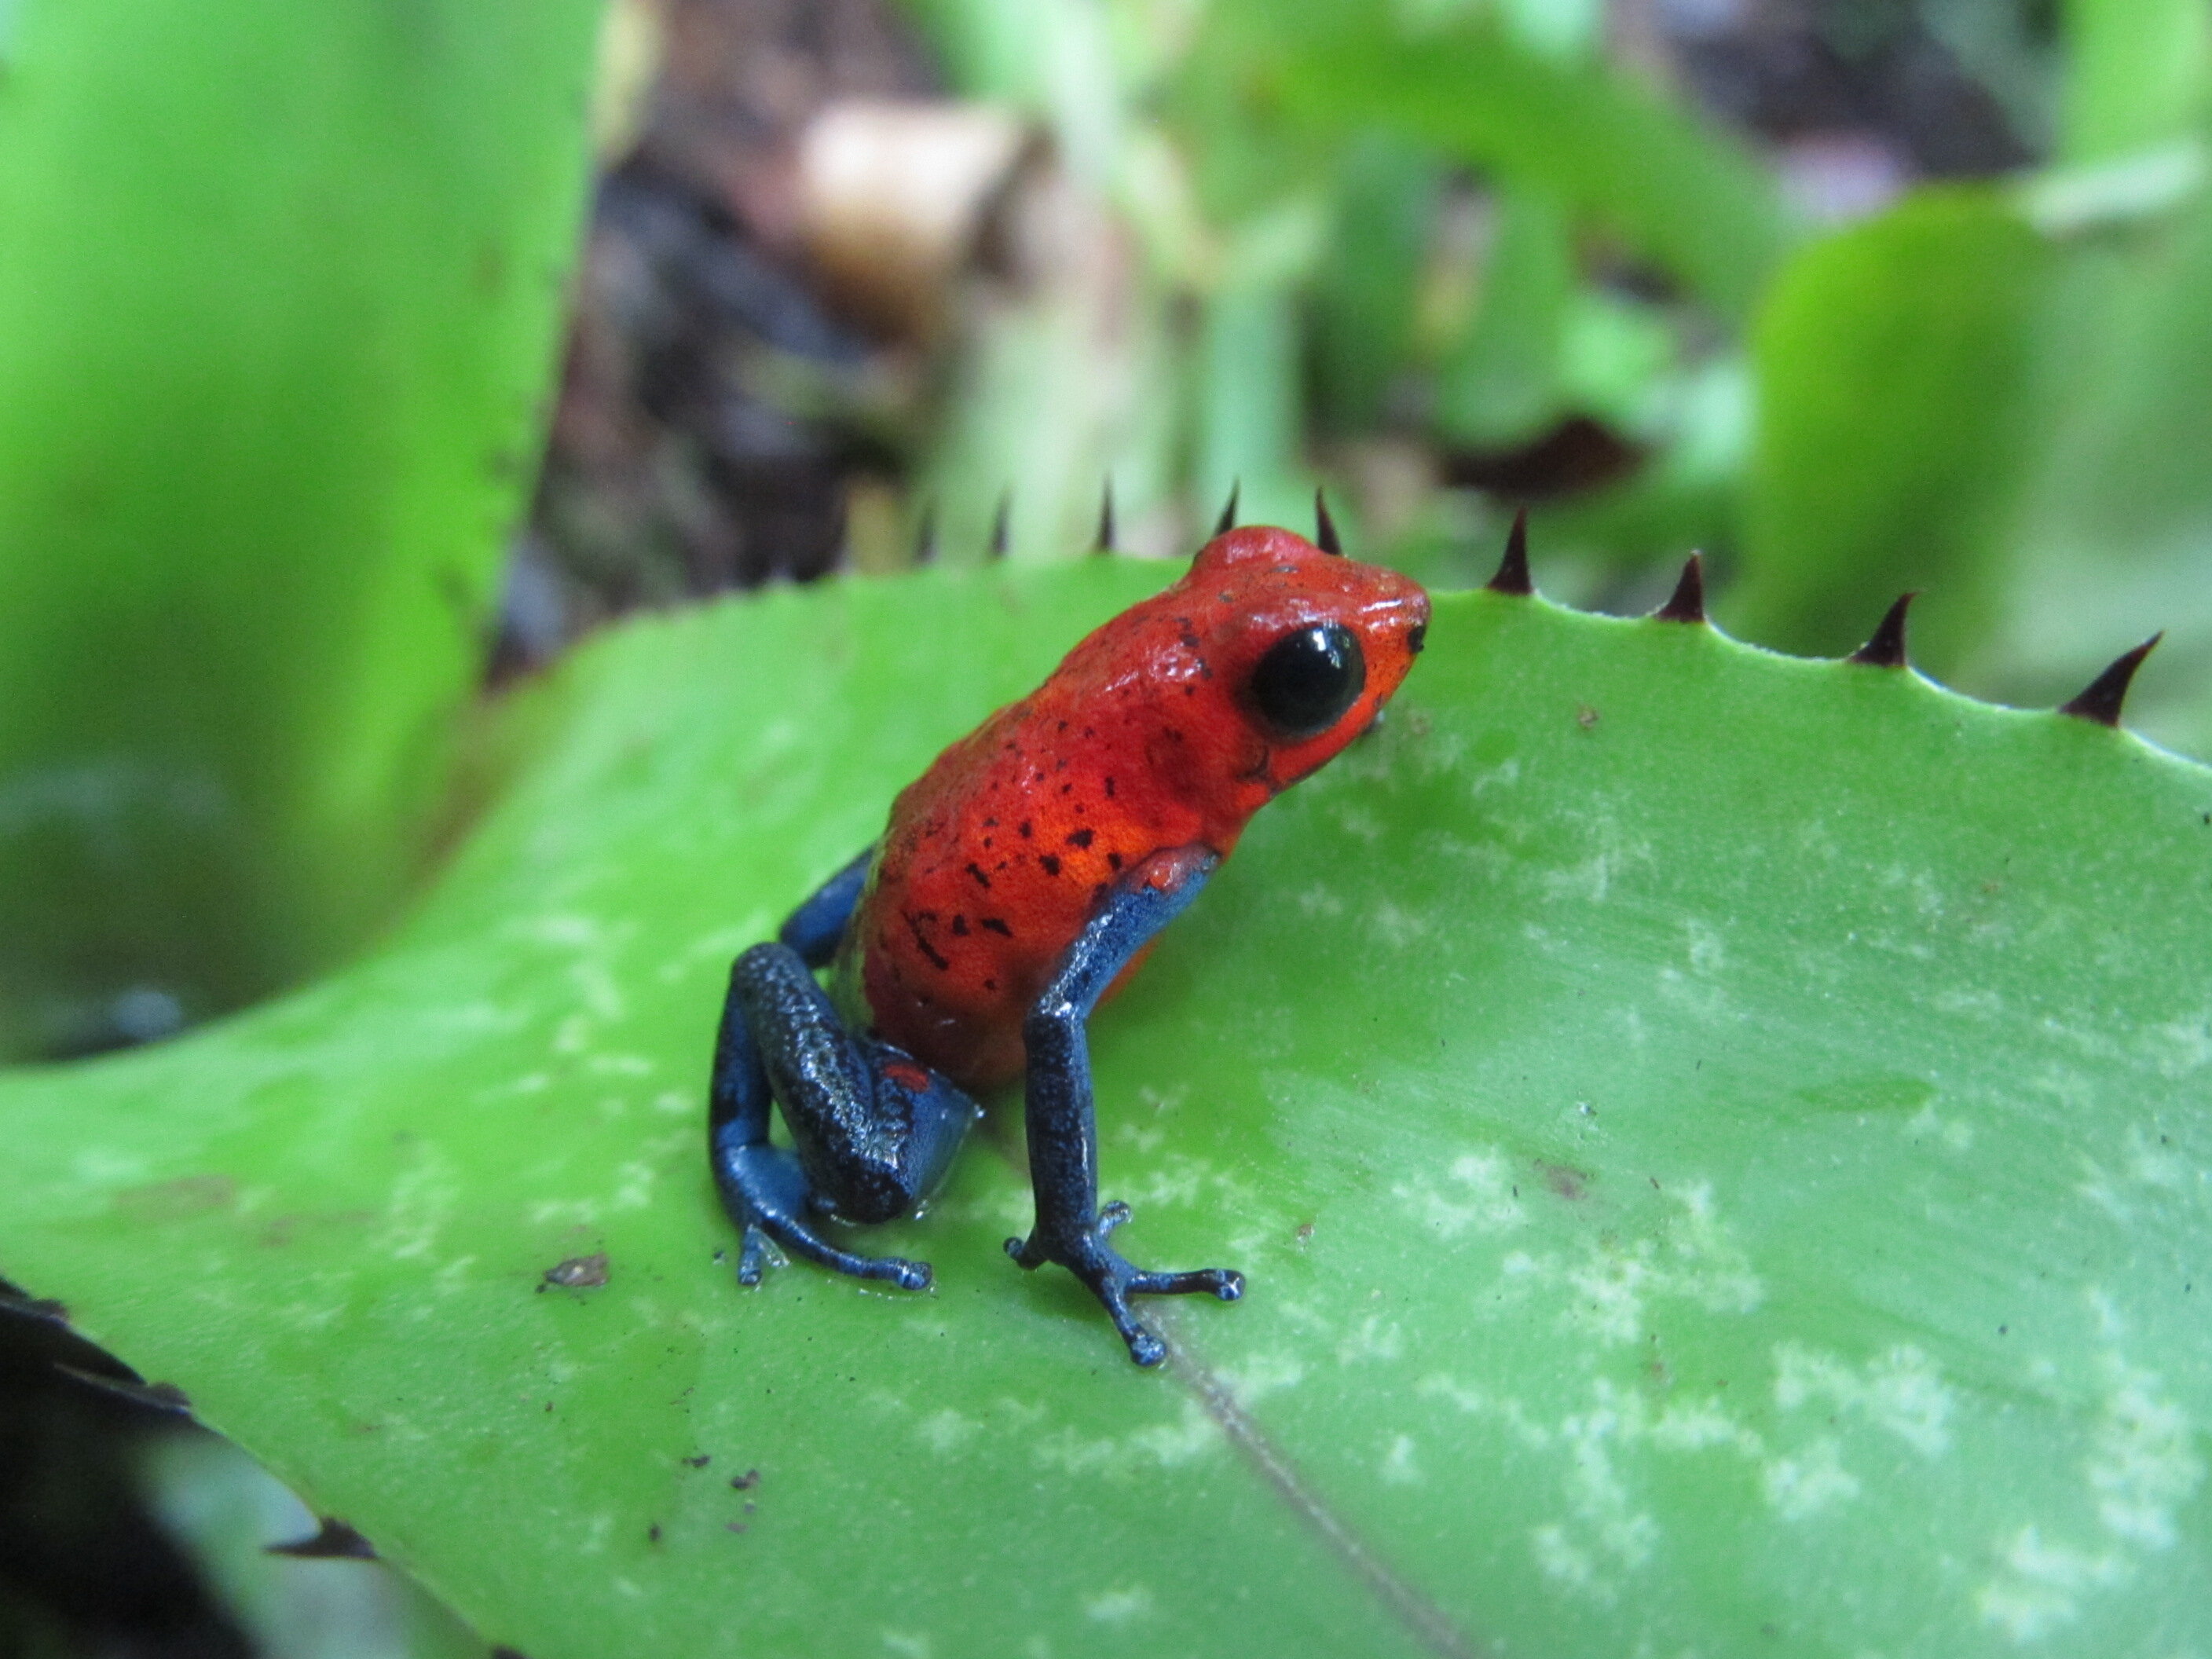 To learn how poison frogs are adapting to warmer temperatures